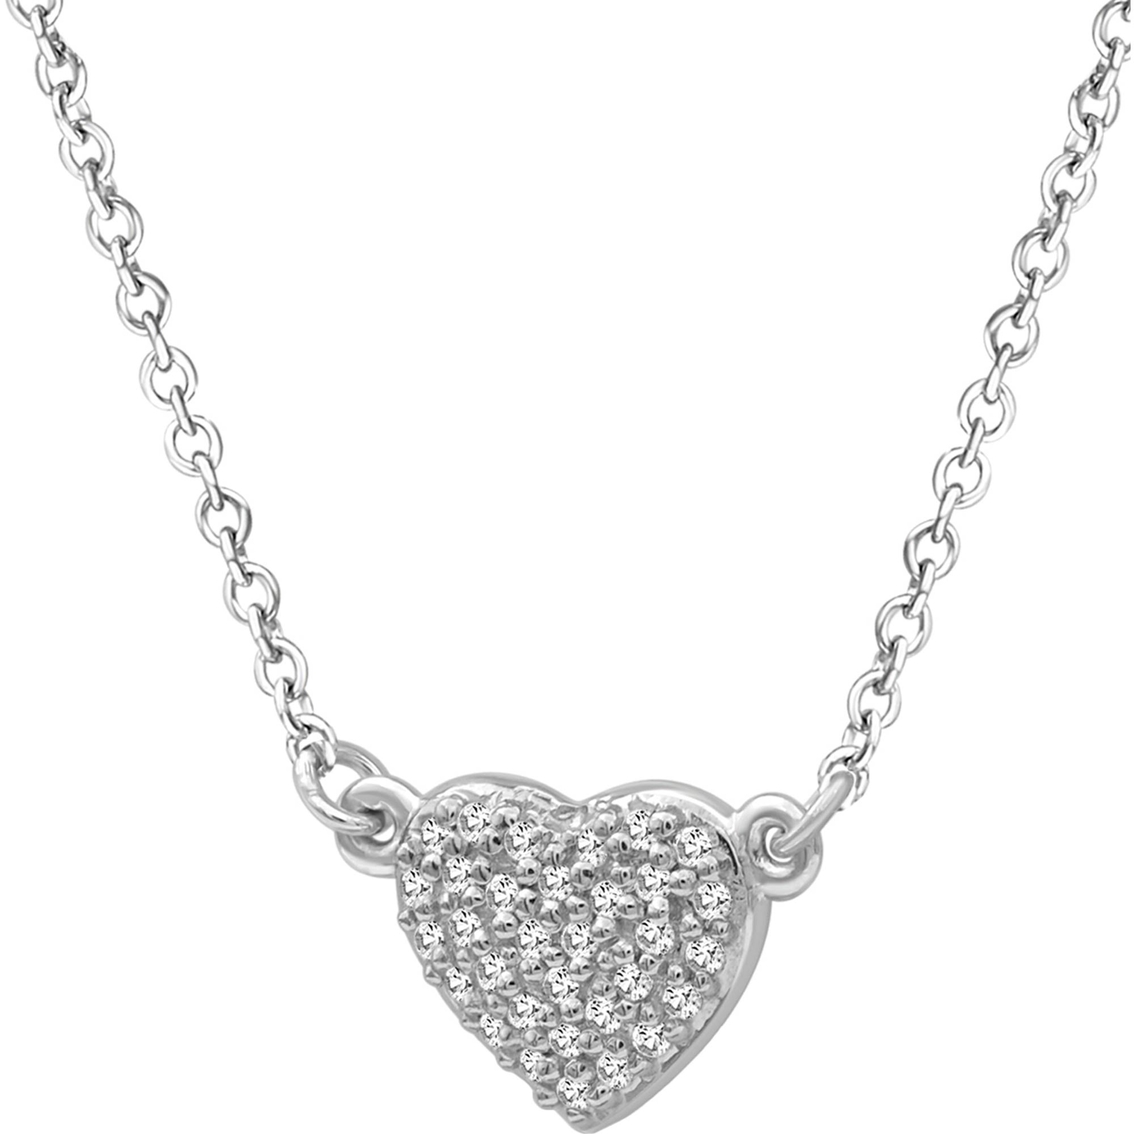 She Shines Sterling Silver 1/4 CTW Diamond Earring and Necklace Set - Image 2 of 7